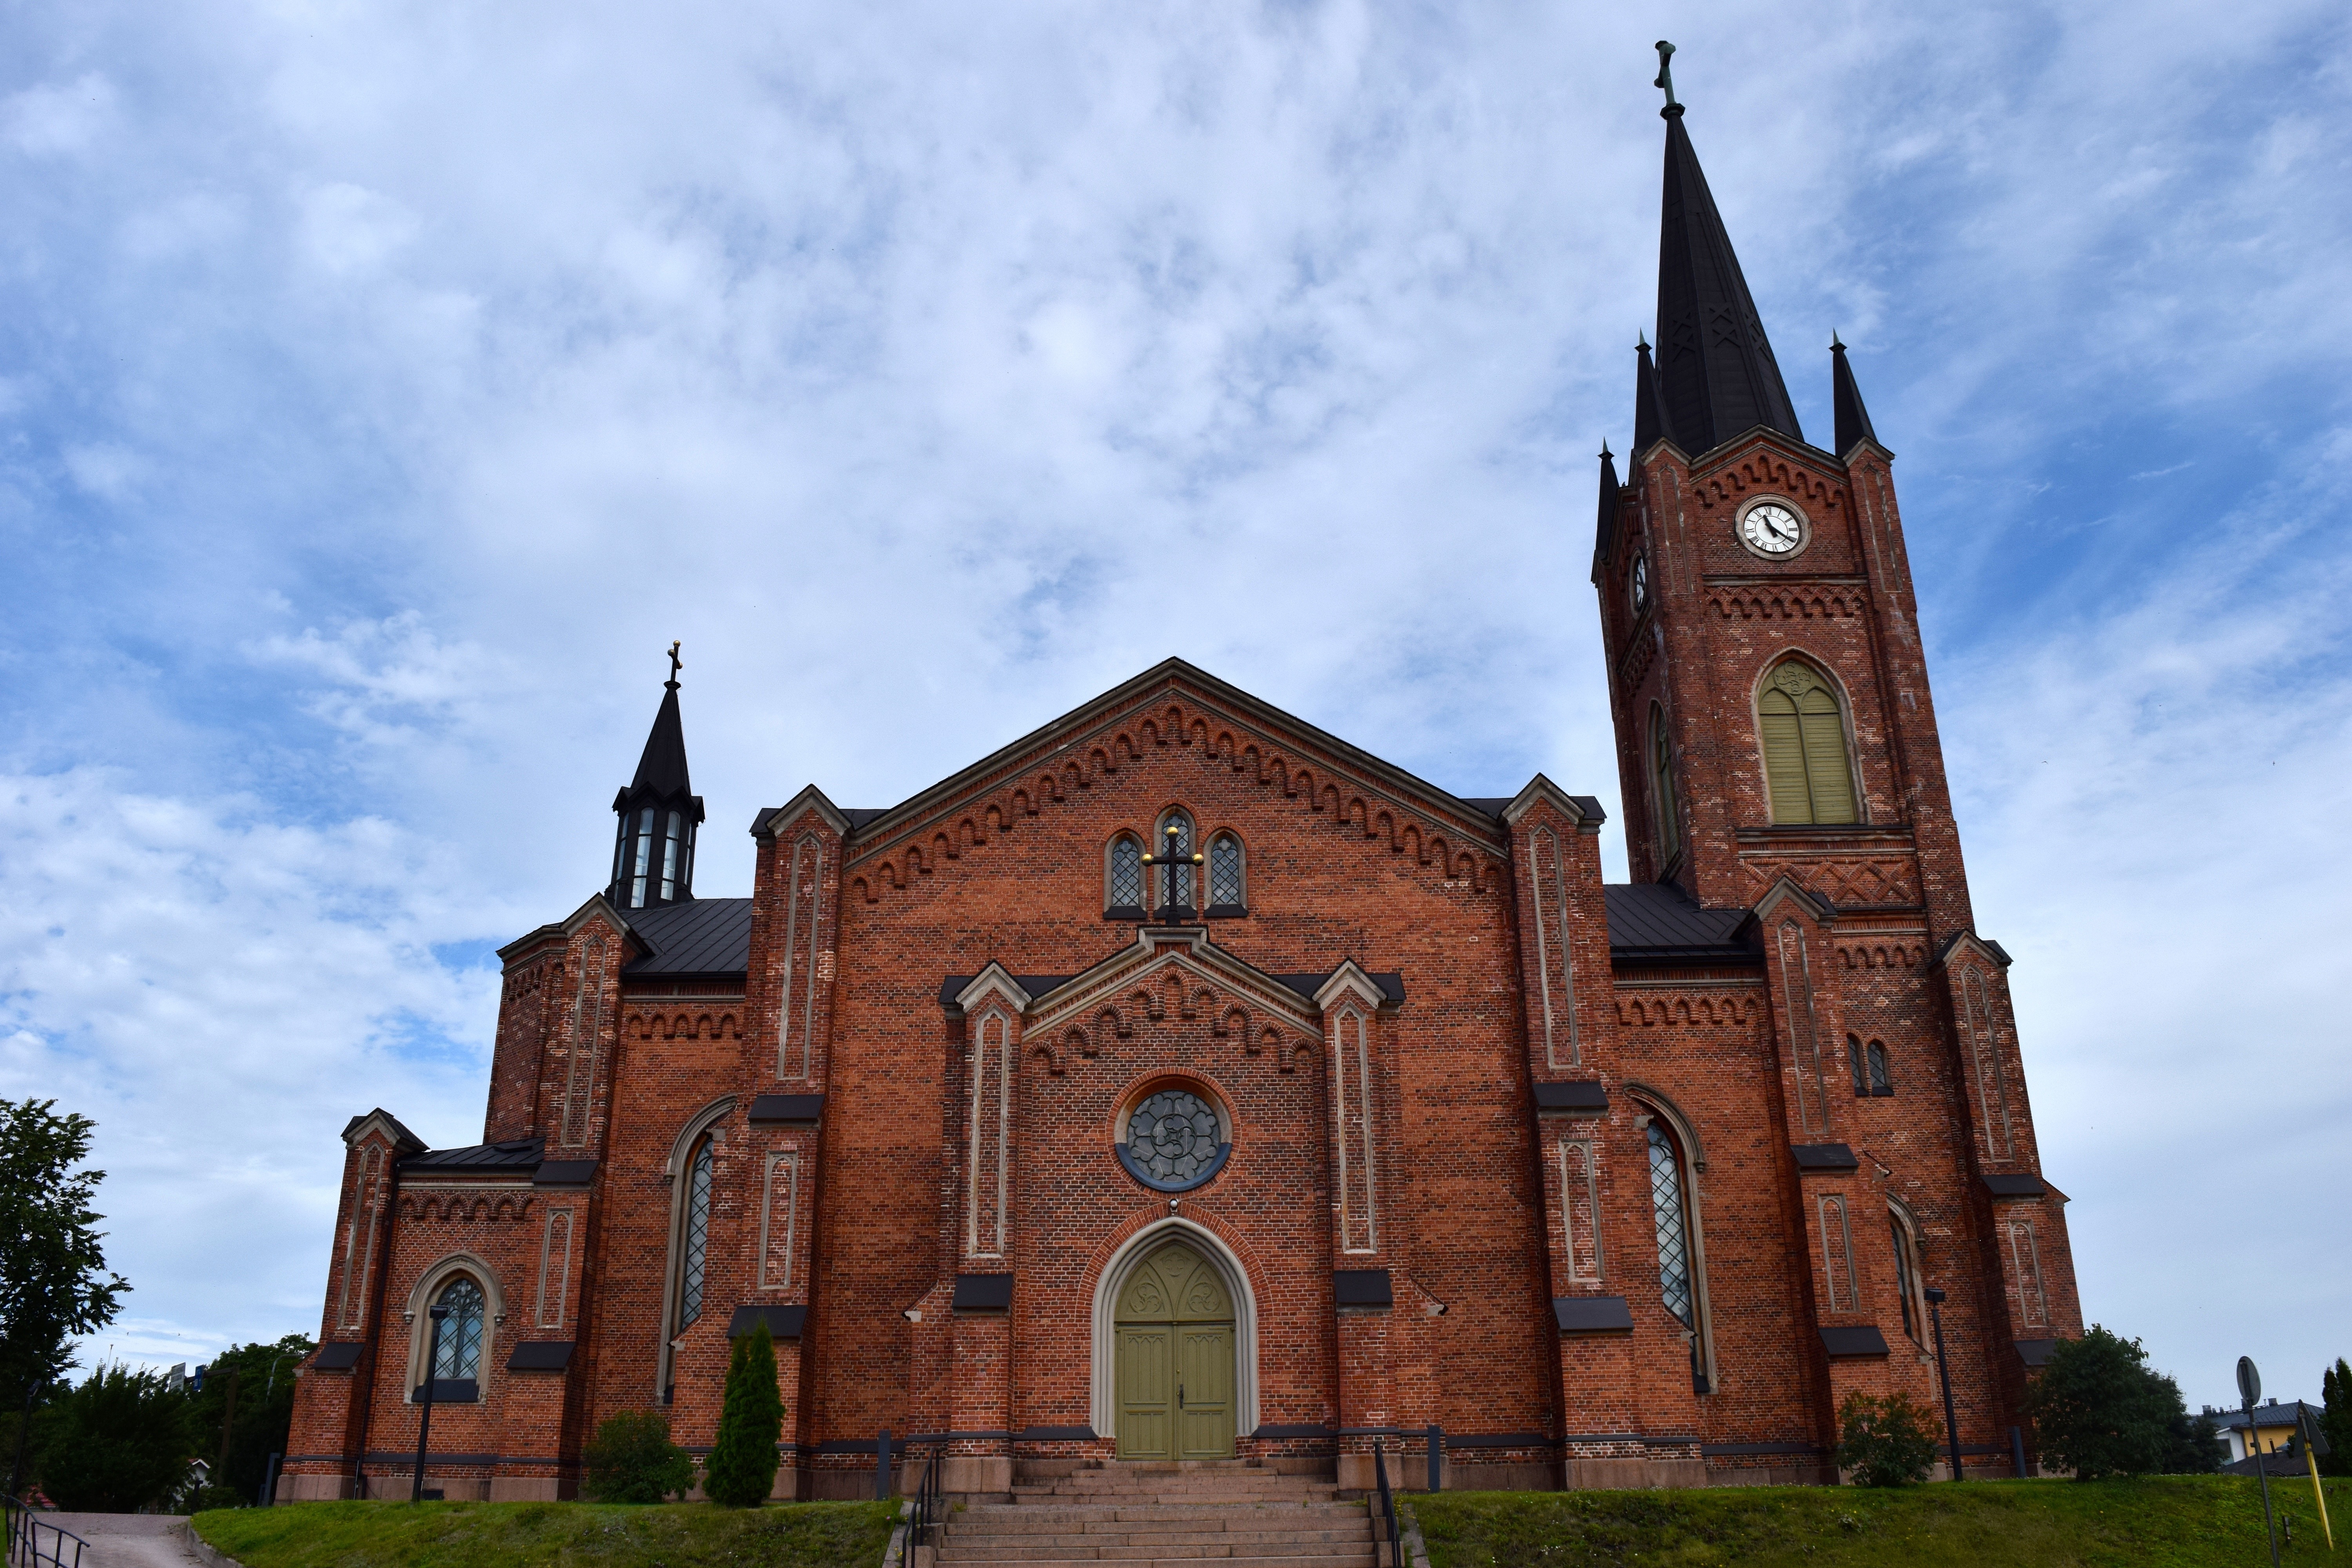 brown bricked cathedral